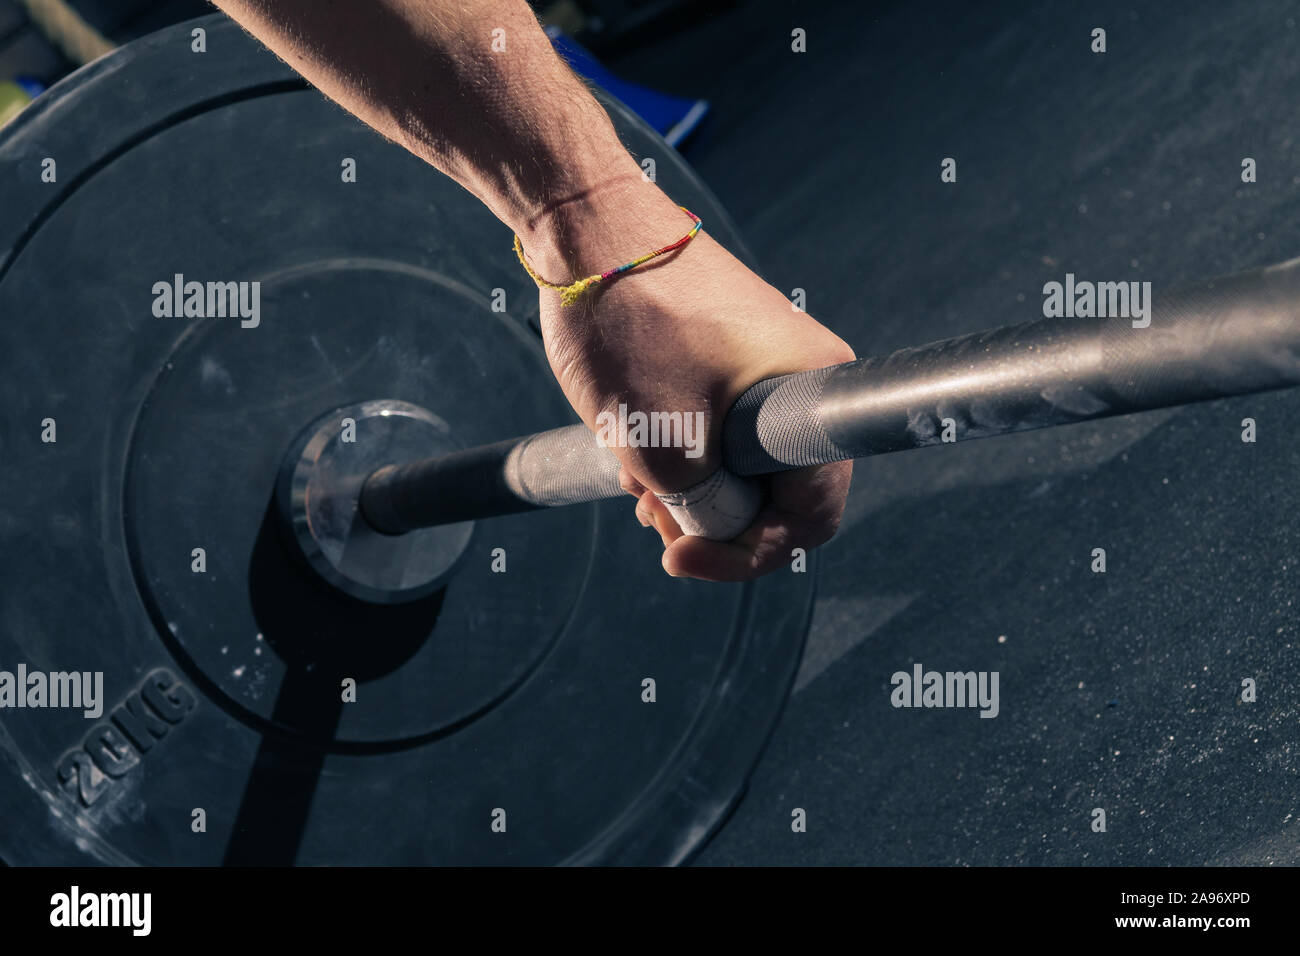 Closeup of man's left hand with bracelet hook gripping a barbell with 20kg  plates Stock Photo - Alamy